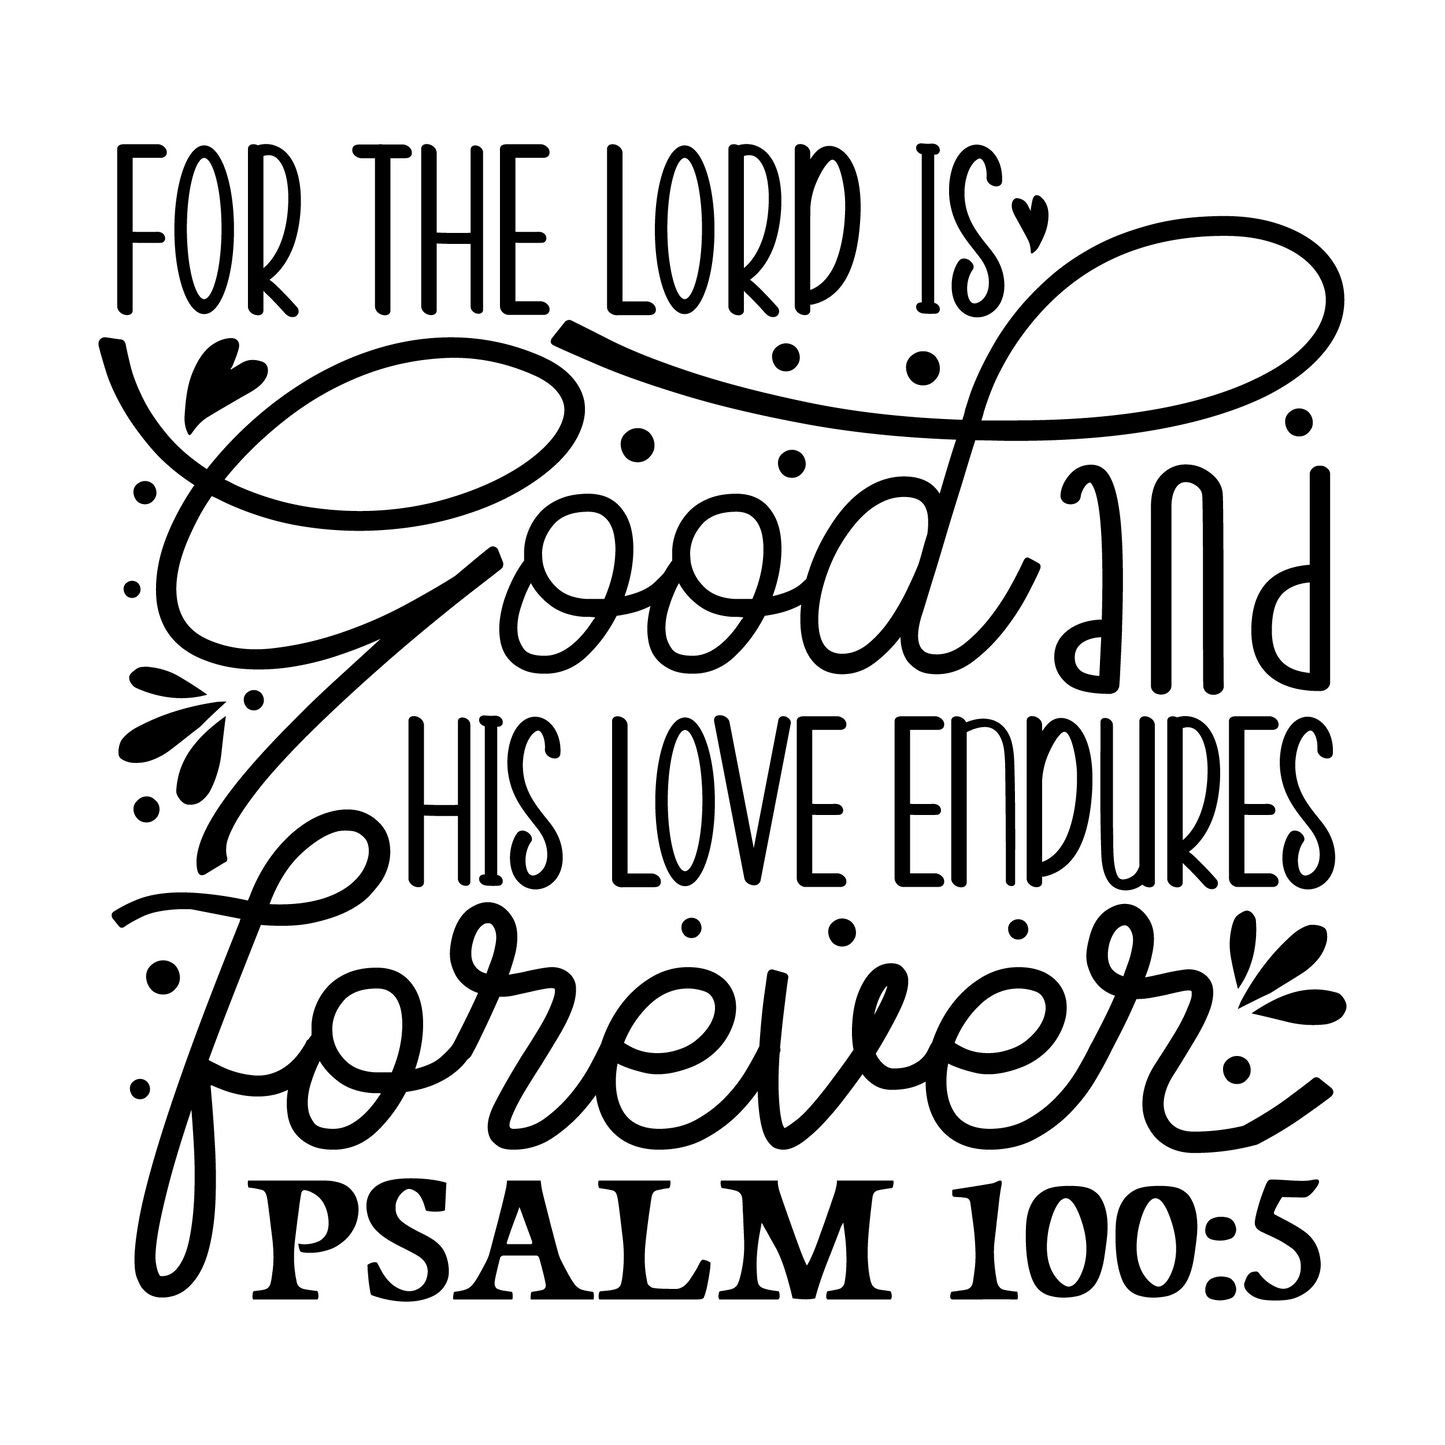 Inspirational Quote "For The Lord is Good and His Love Endures Forever PSALM 100:5" Motivational Sticker Vinyl Decal Motivation Stickers- 5" Vinyl Sticker Waterproof